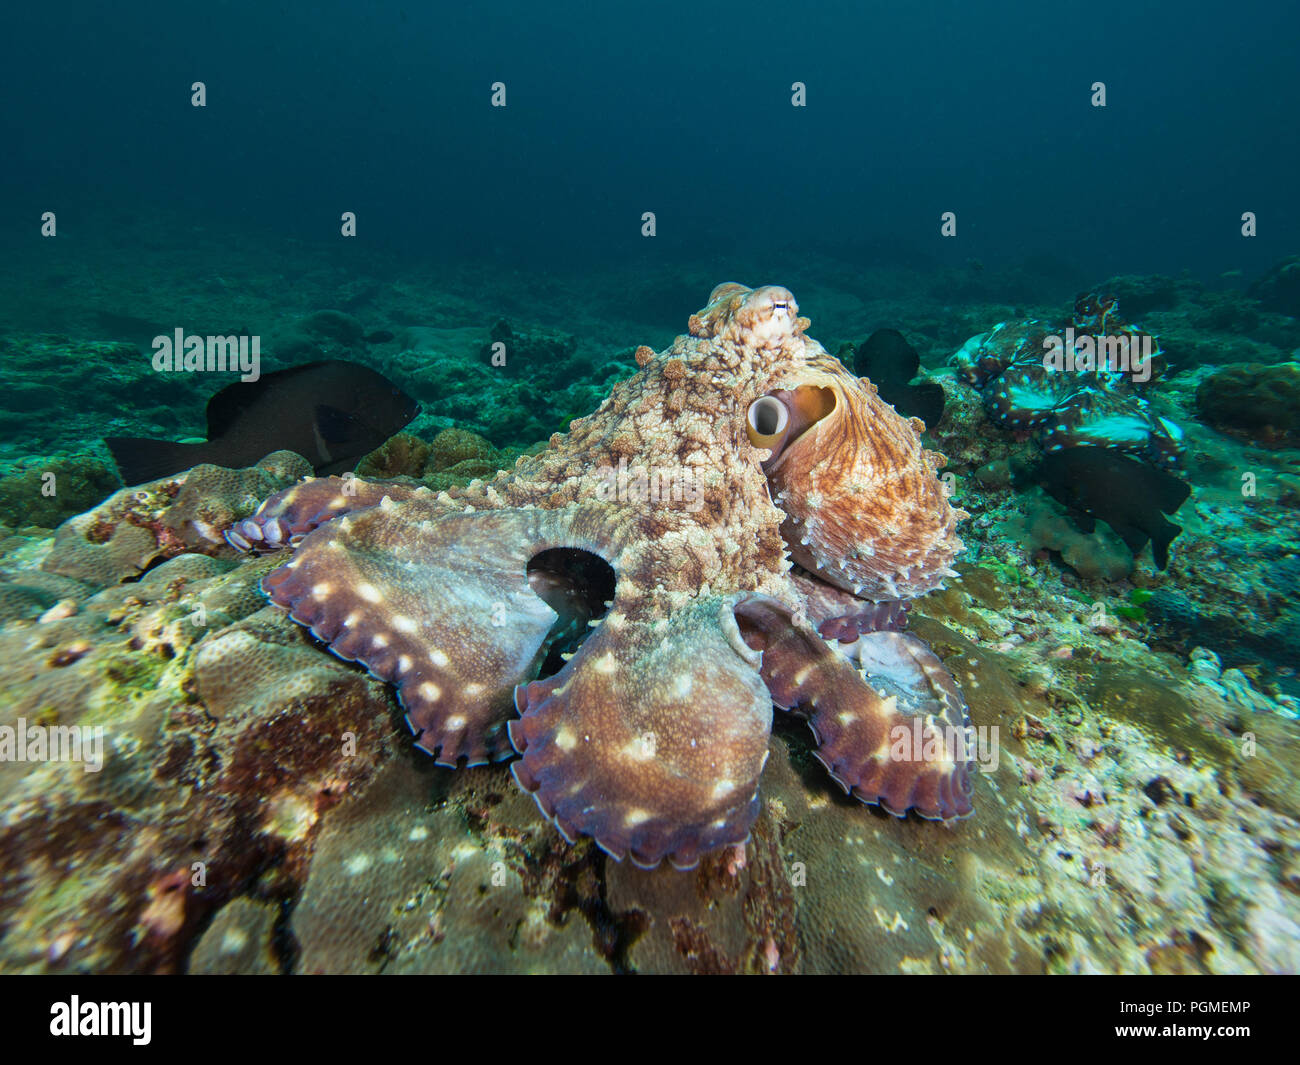 Octopus on a coral reef Stock Photo